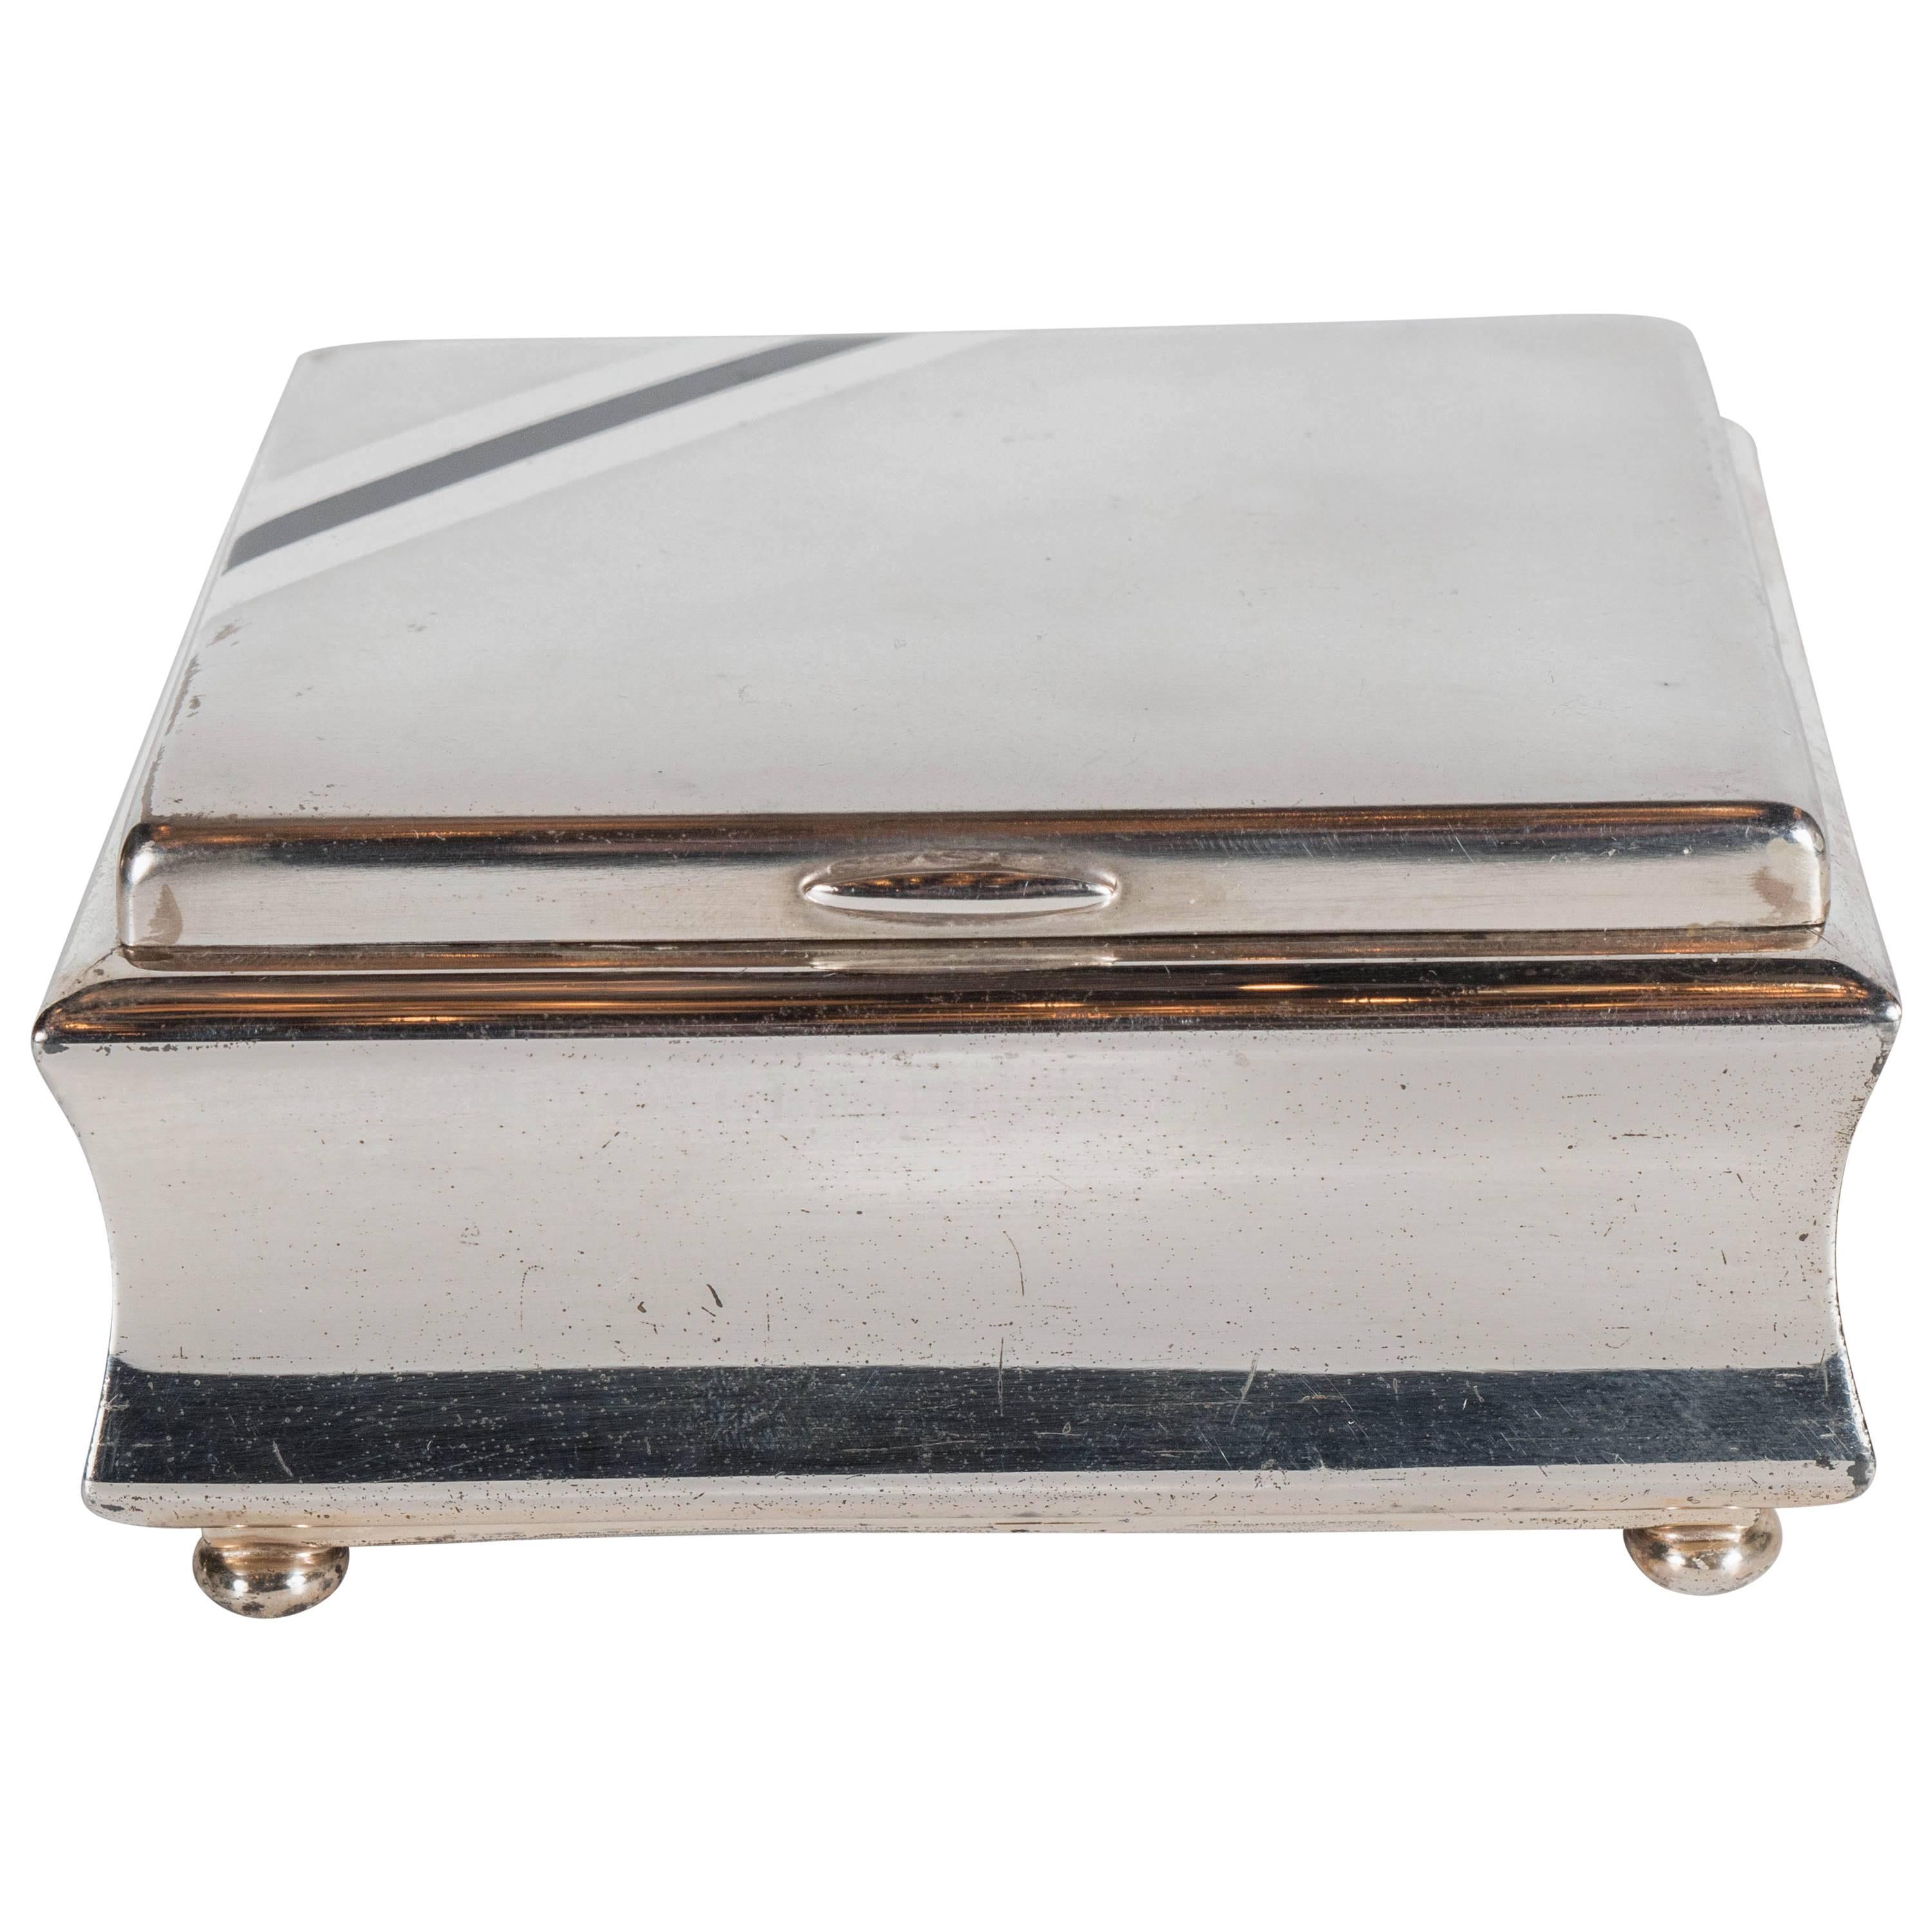 Handsome Art Deco Silver Plated Square Box by WMF